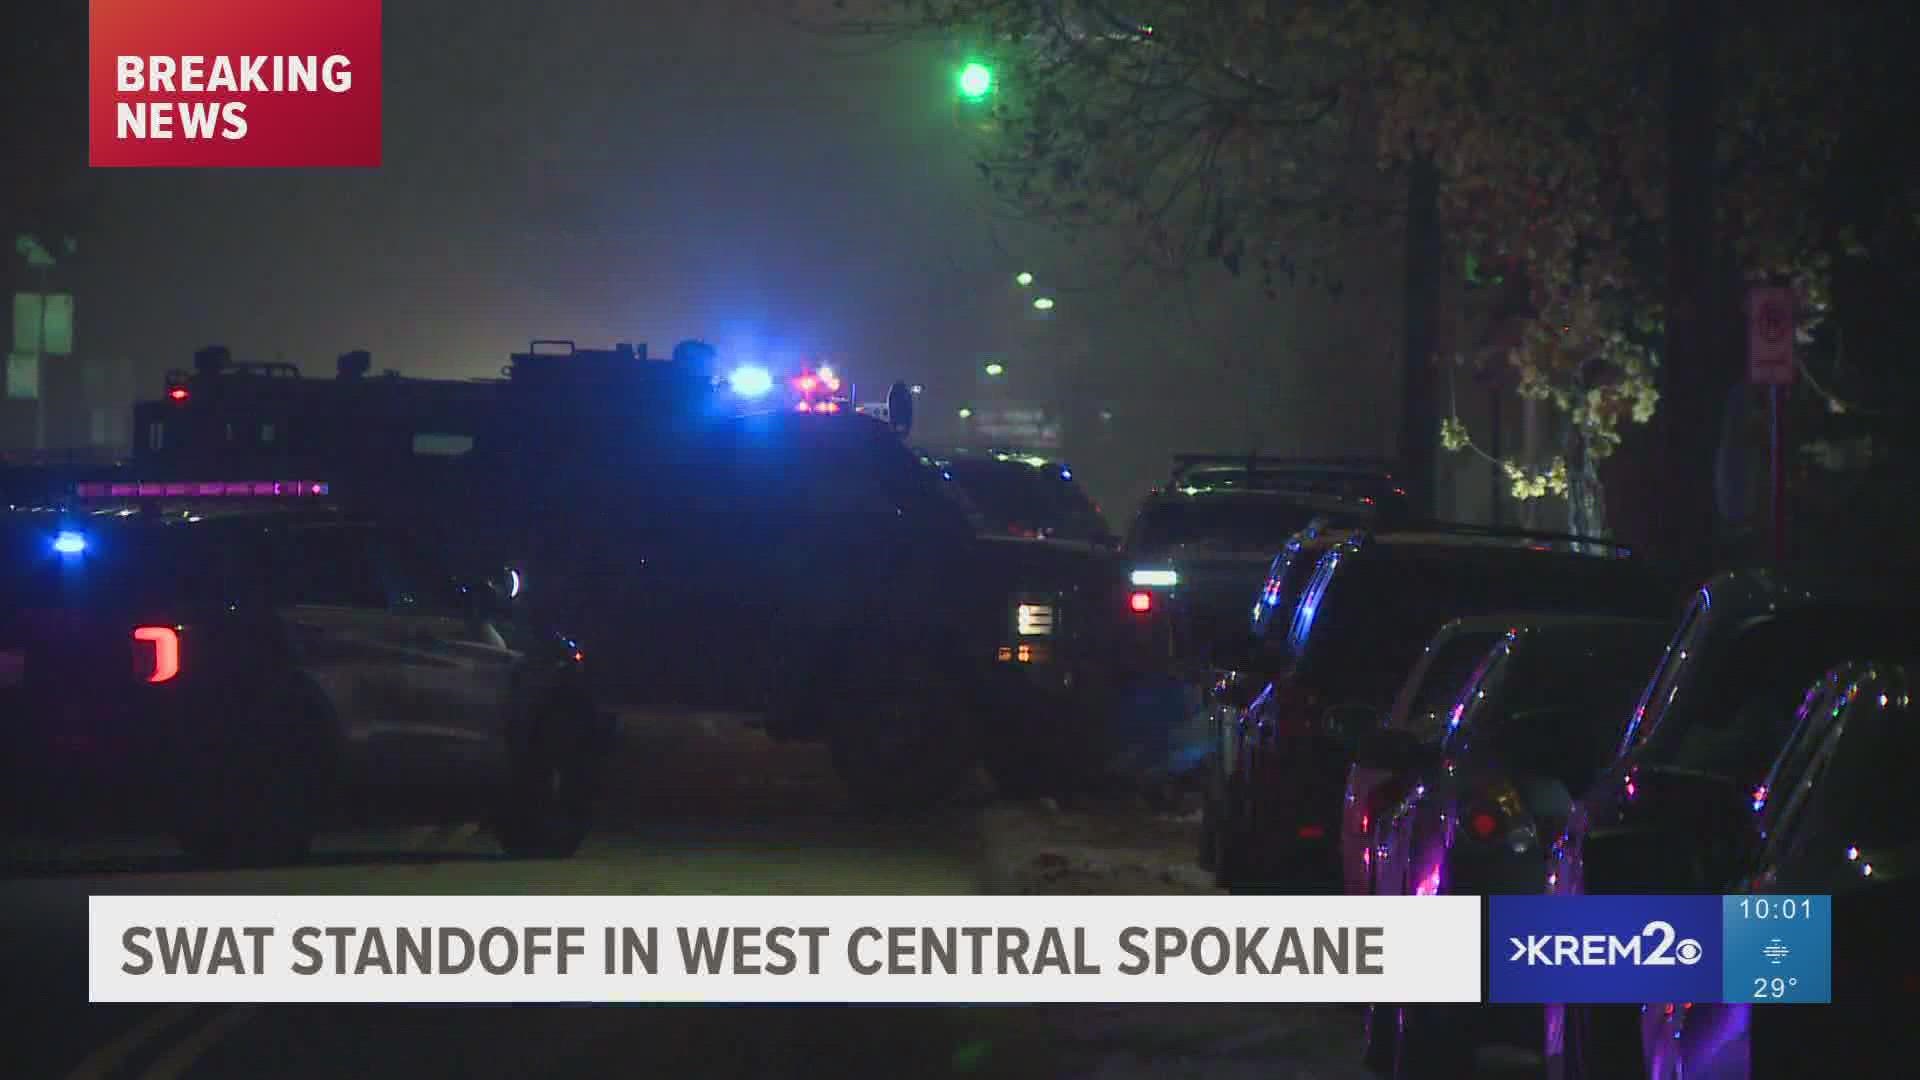 This standoff is happening near the corner of Ash and Boone. KREM 2 hasn't been able to confirm the suspect's name or what they are wanted for.